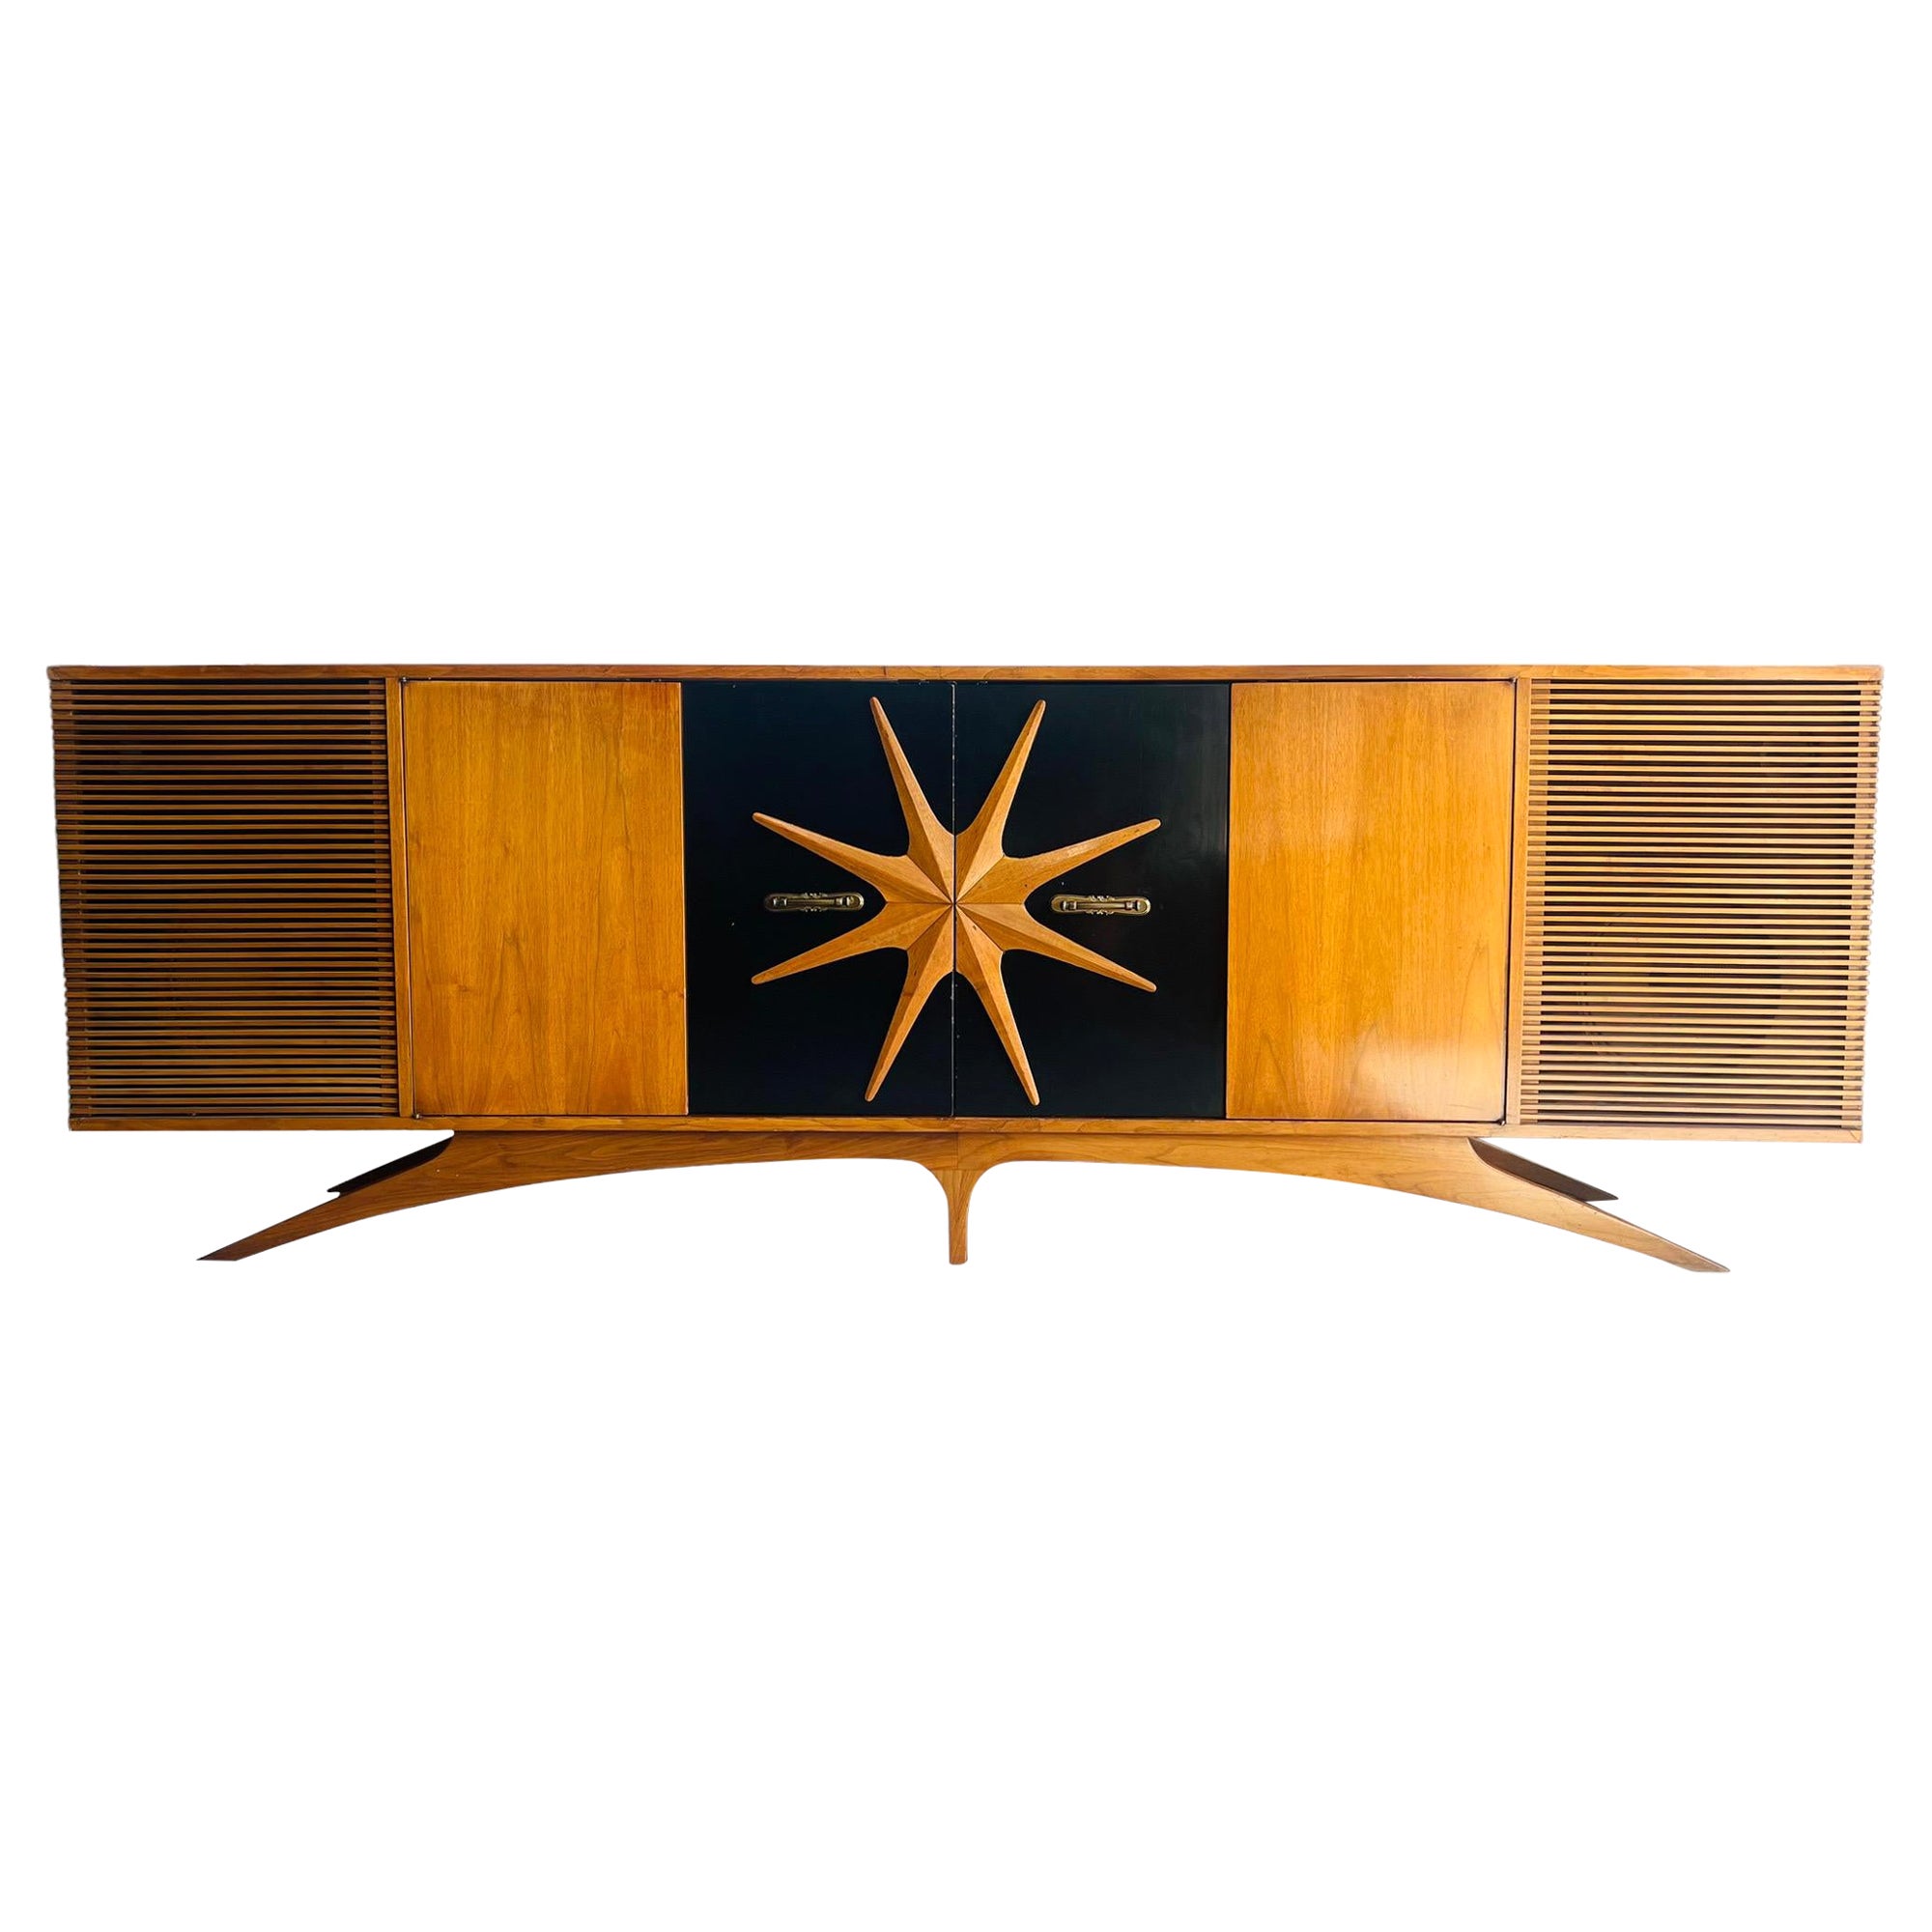 Rare Sculptural Credenza / Stereo Cabinet in Walnut in Manner of Vladimir Kagan For Sale